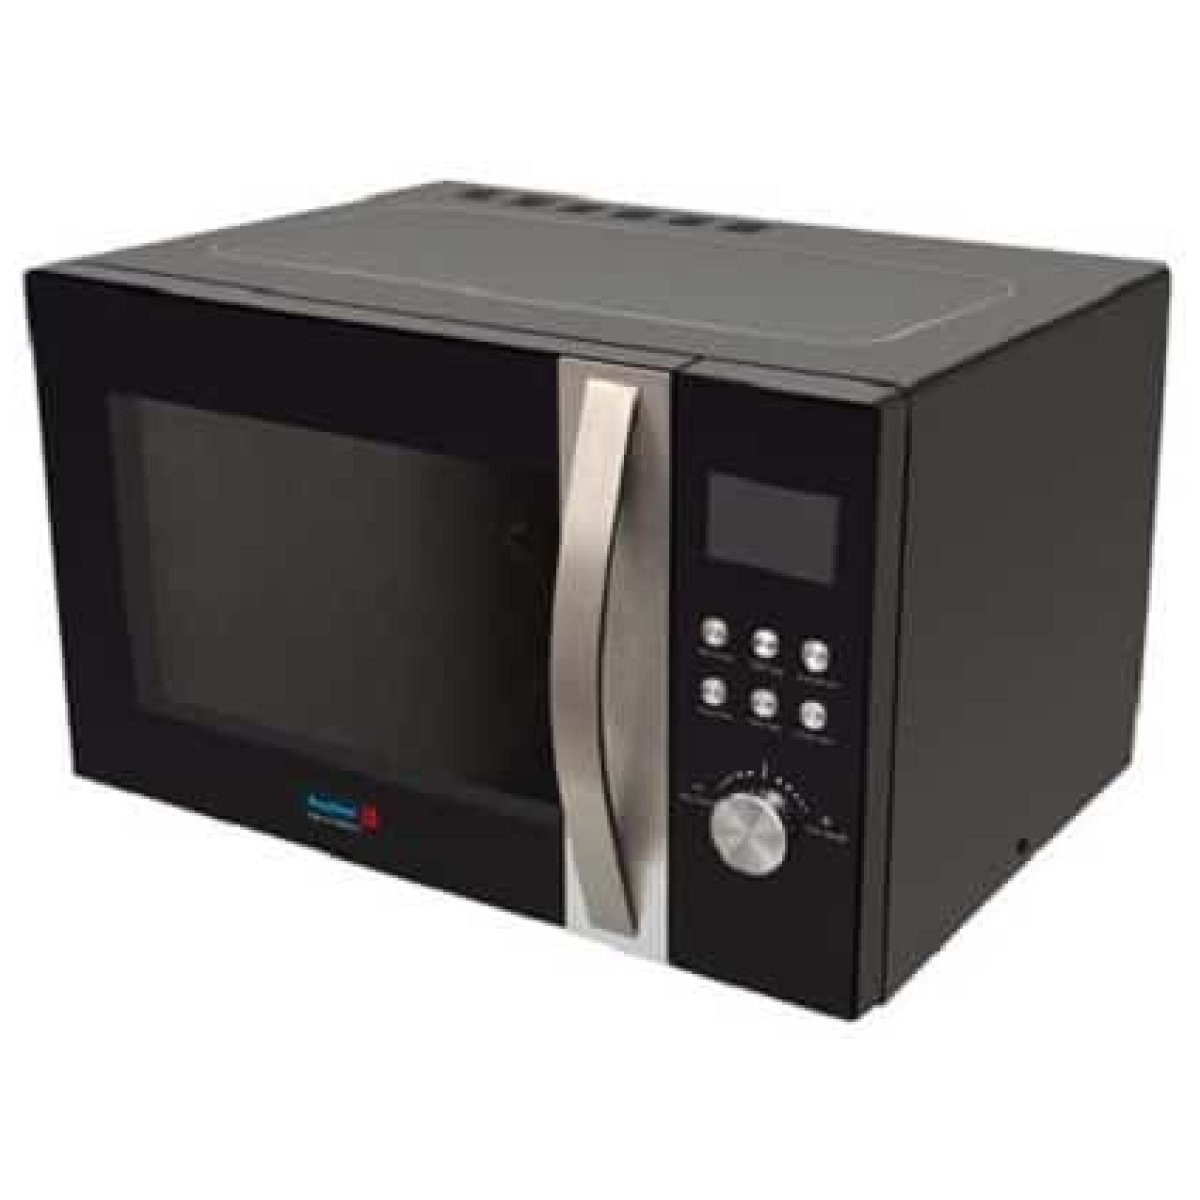 Scanfrost SF 34 34 LITERS Microwave WITH GRILL